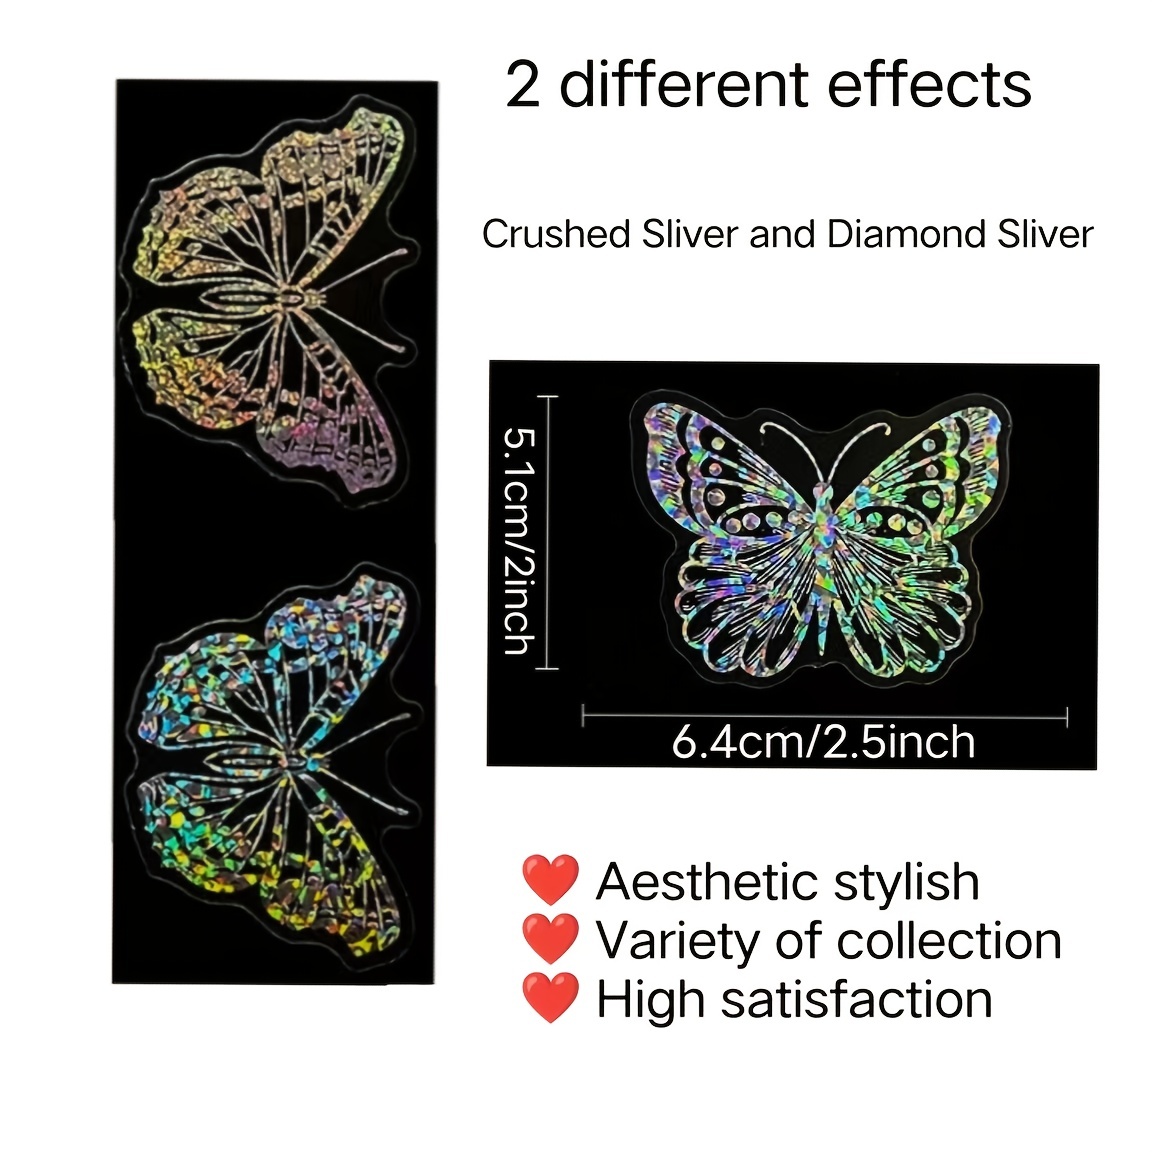  240PCS Shiny Holographic Resin Stickers Flower Butterfly  Transparent Laser Stickers for Resin DIY Vintage Magic Theme for Art Crafts  Scrapbooking Journal Planner Water Bottle Laptop Phone (A)